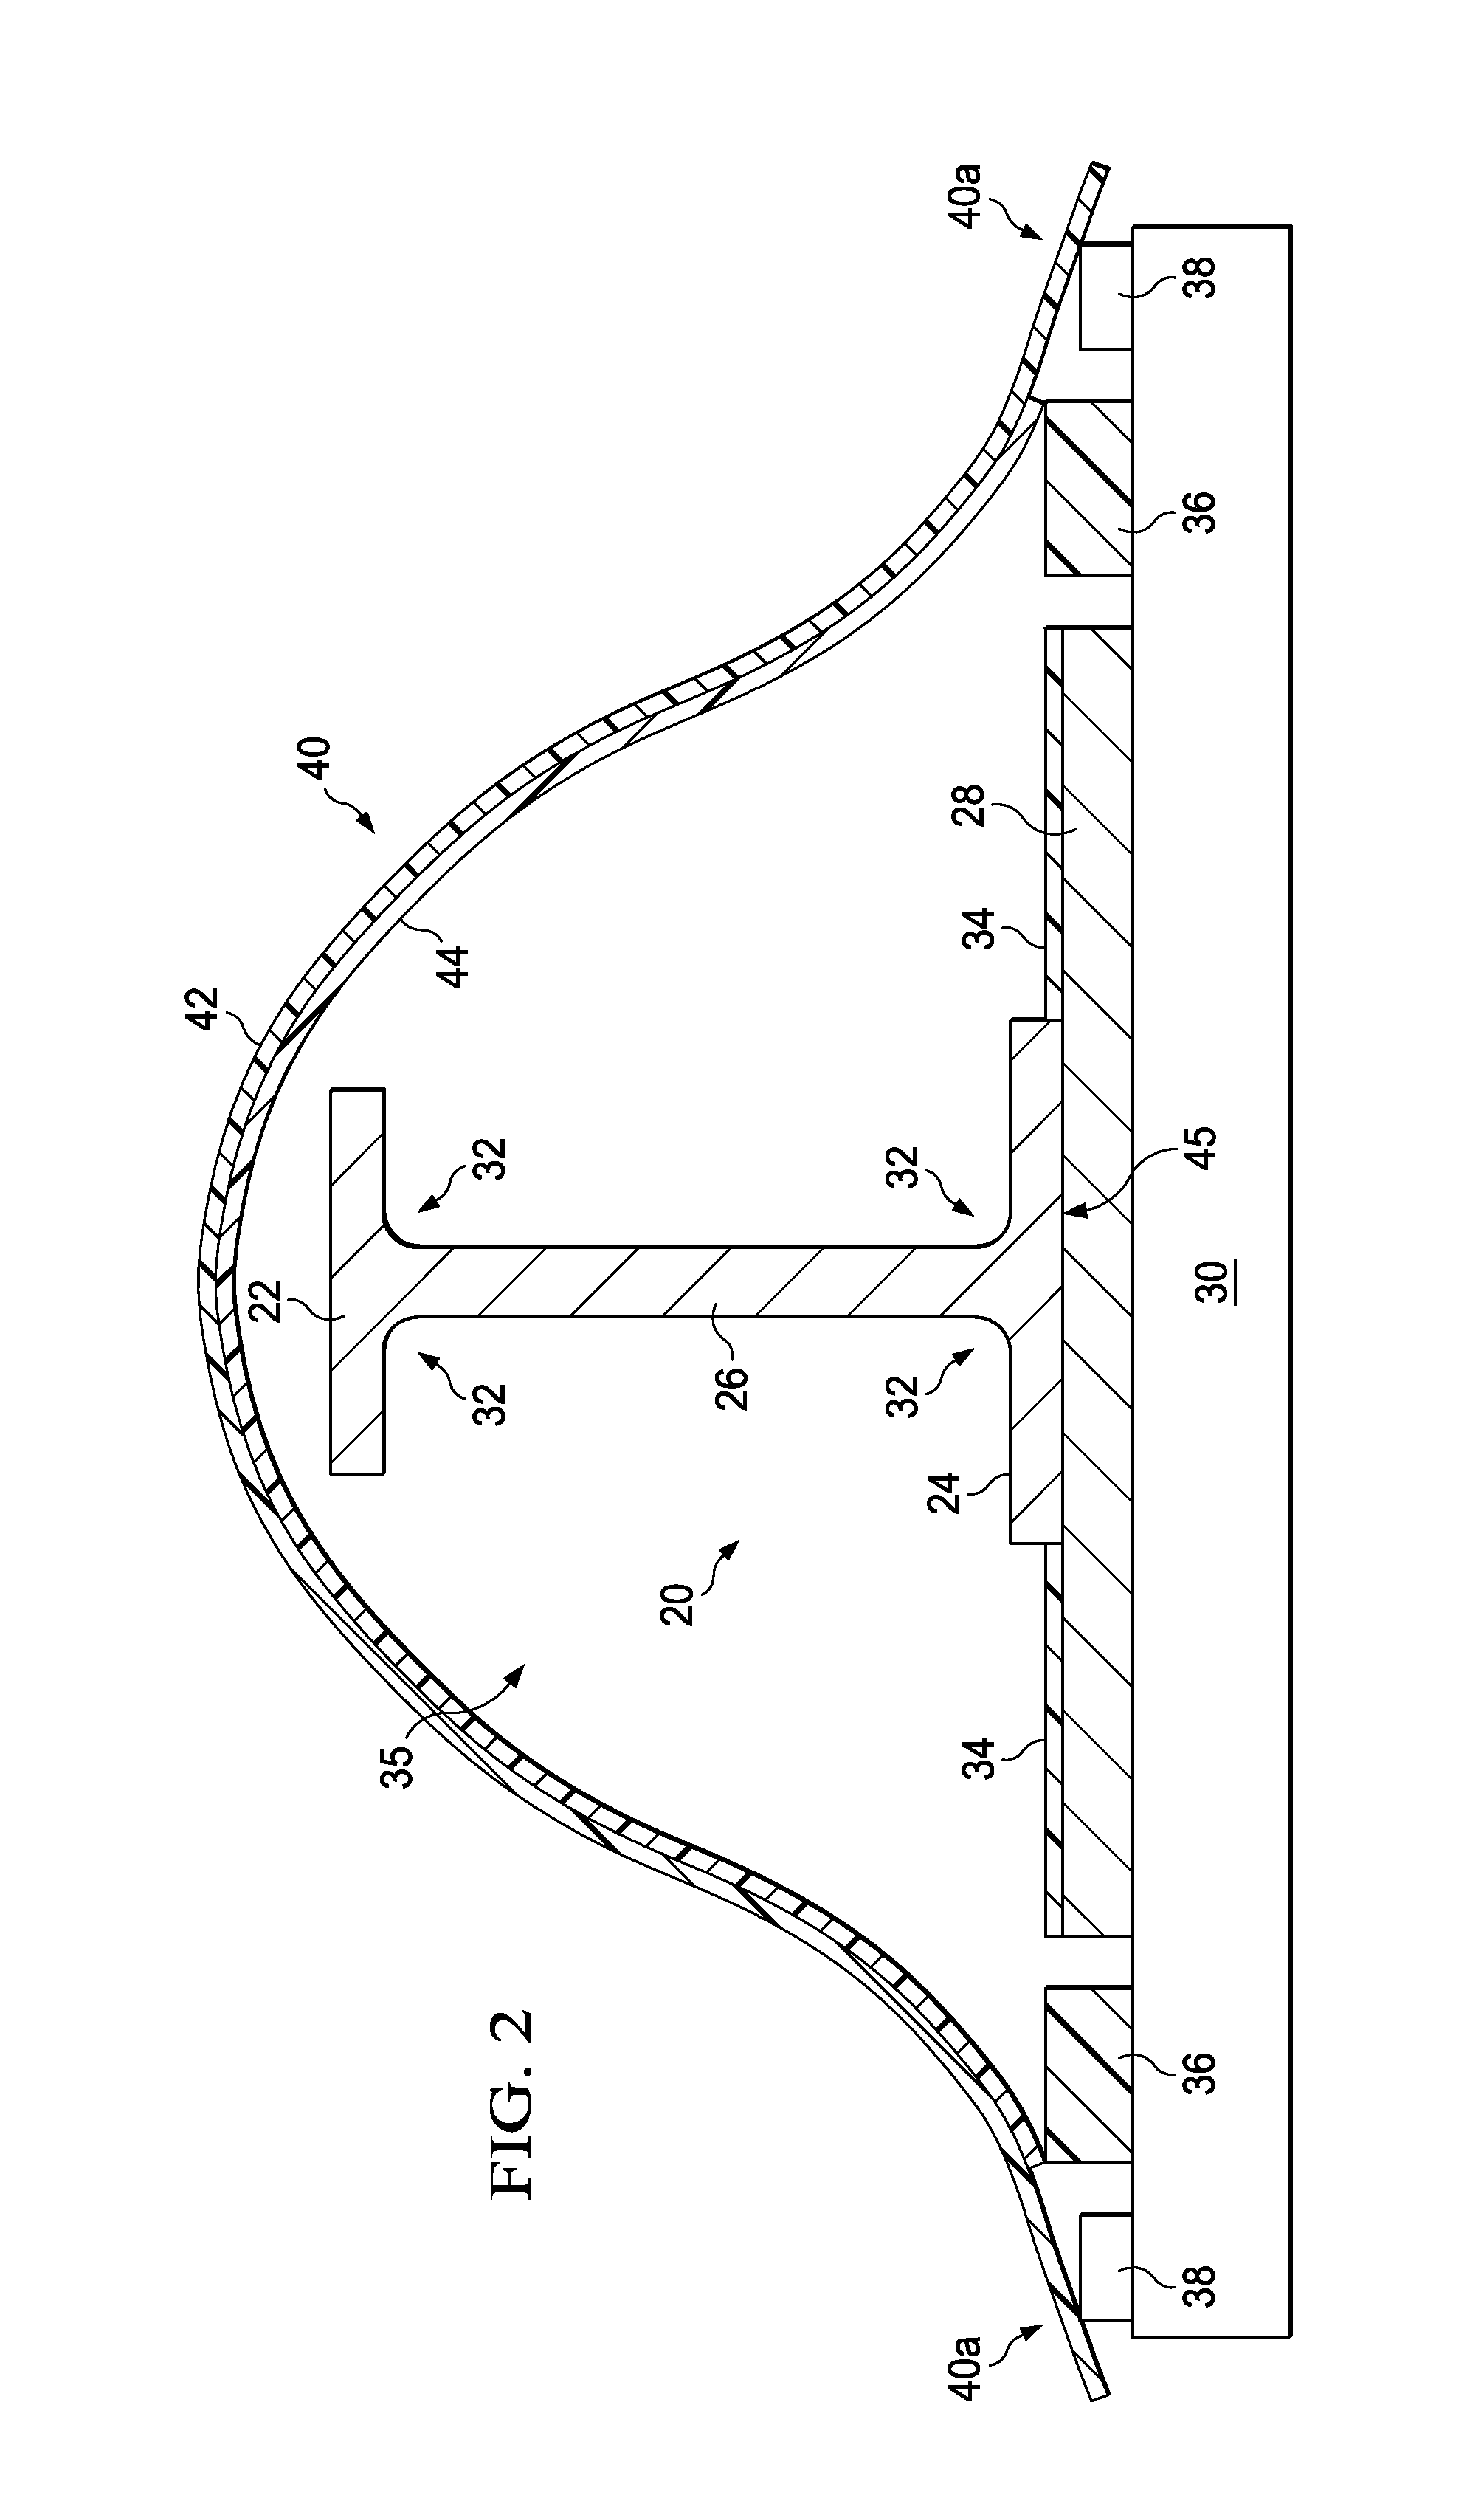 Vacuum Bag Processing of Composite Parts Using a Conformable Vacuum Bag Assembly